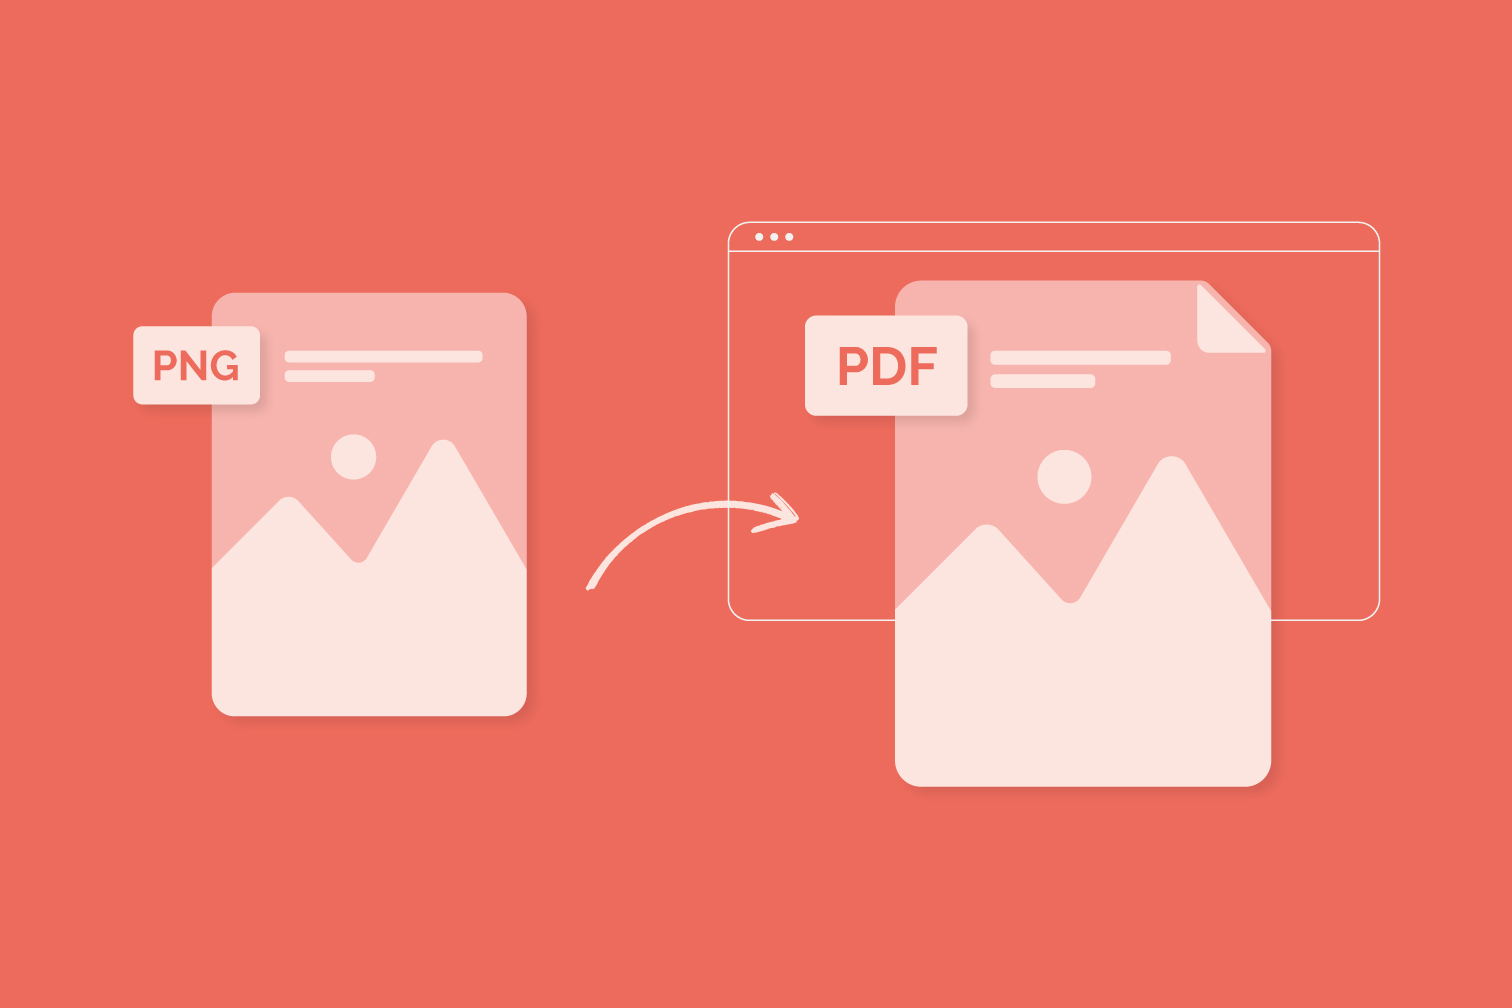 WHY CONVERTING PNG TO PDF IS IMPORTANT FOR DOCUMENT MANAGEMENT?